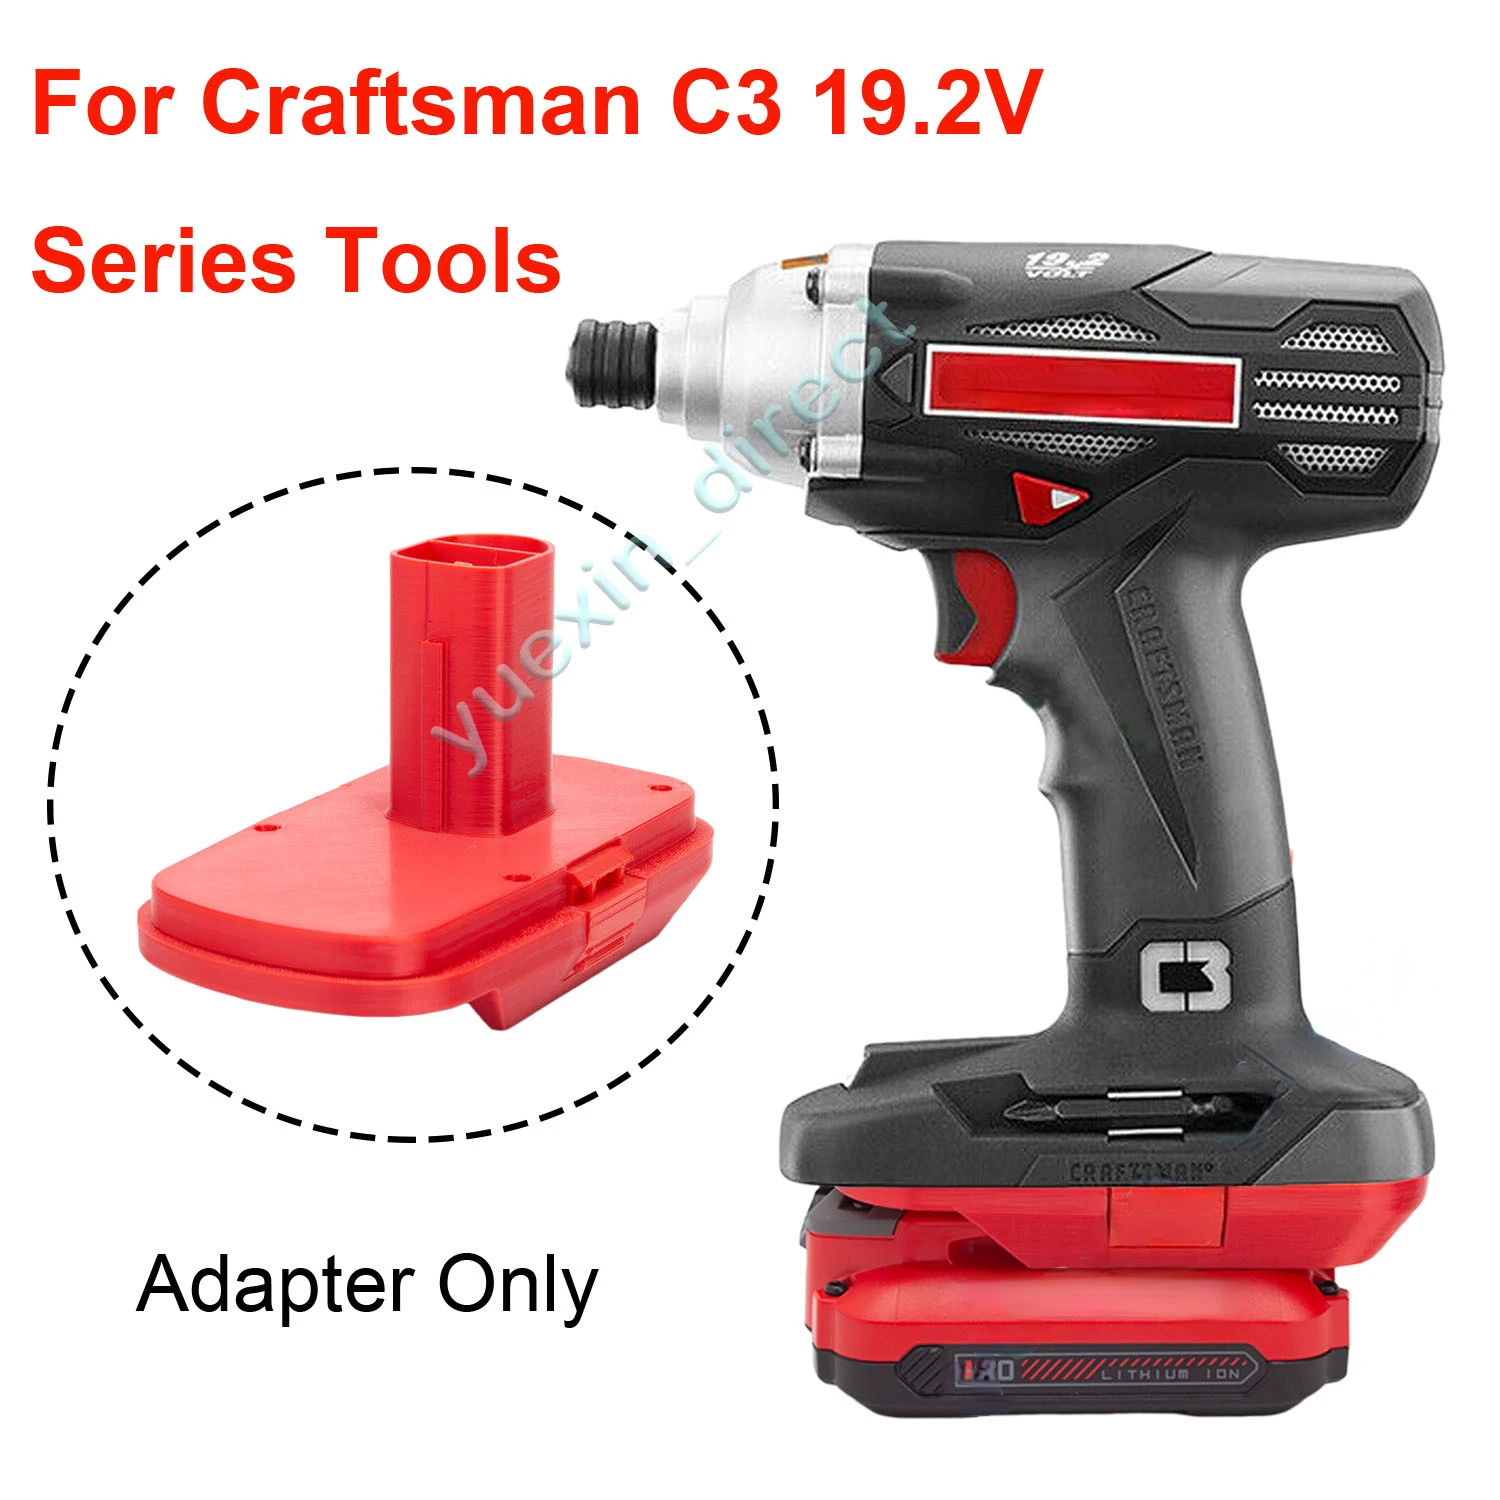 

For Craftsman V20 20V lithium-ion batteries to Craftsman C3 19.2V Series Nickel Batteries Cordless Tools Adapter Converts